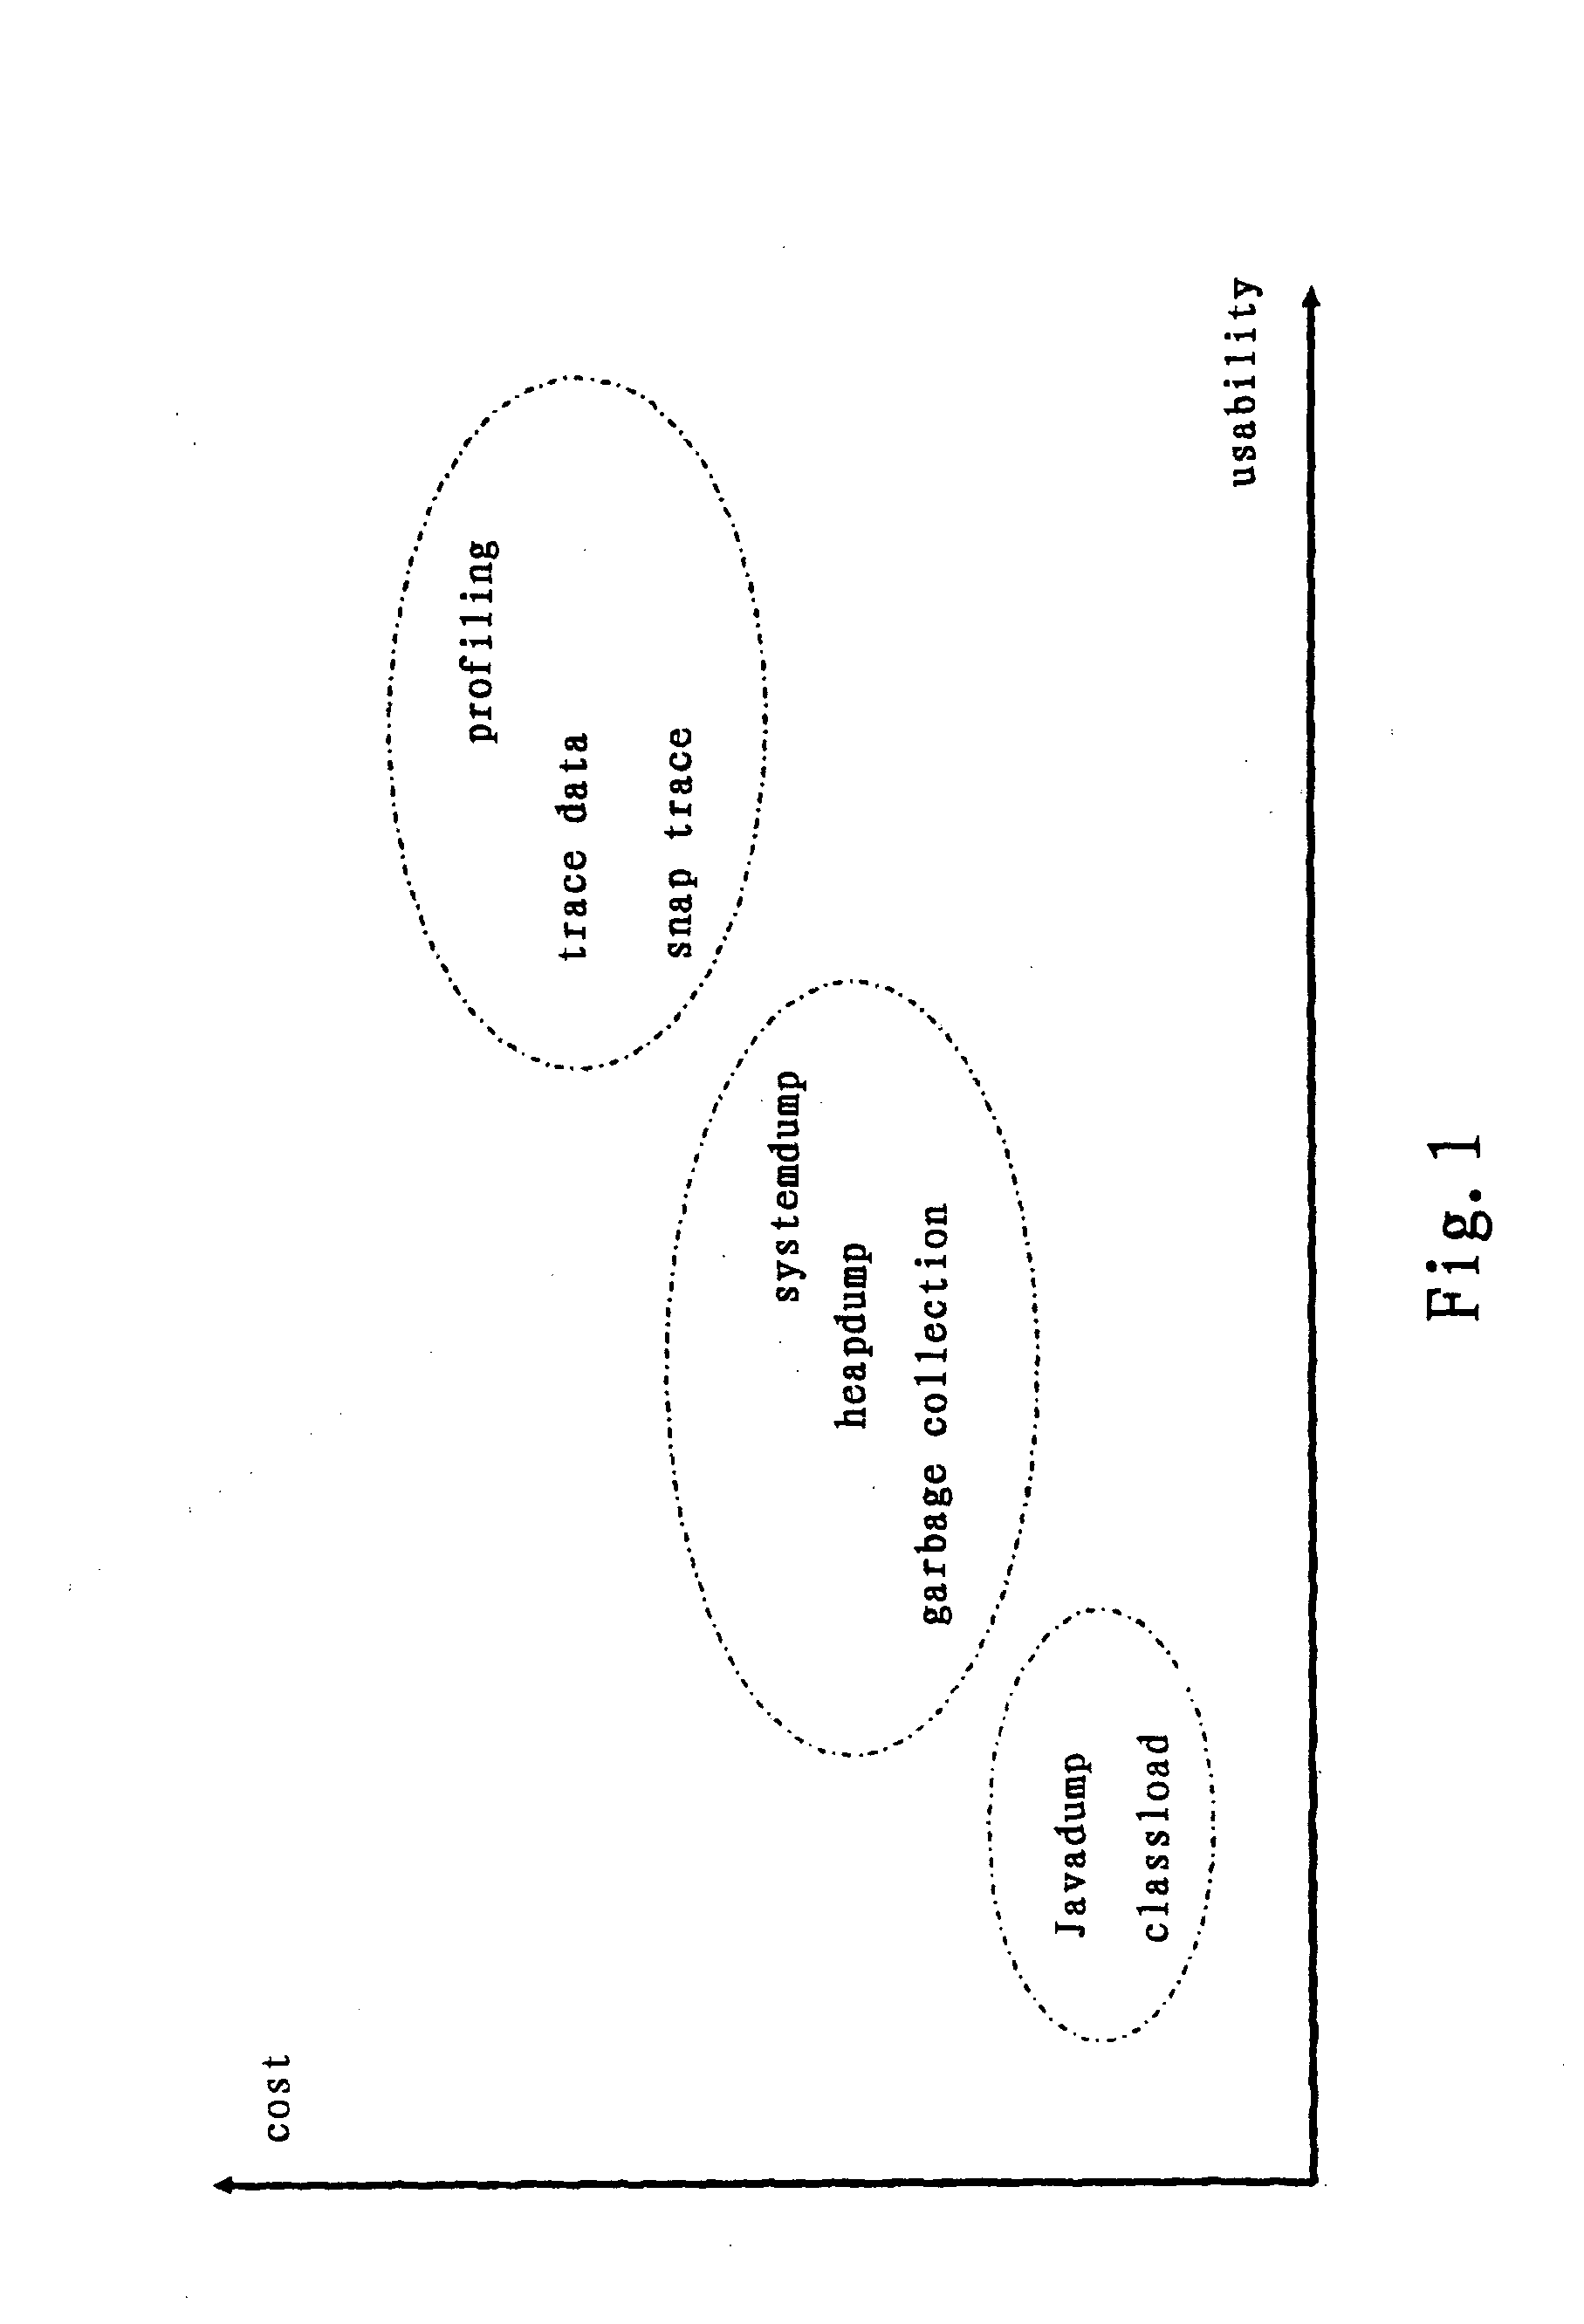 Method and System for Diagnosing an Application